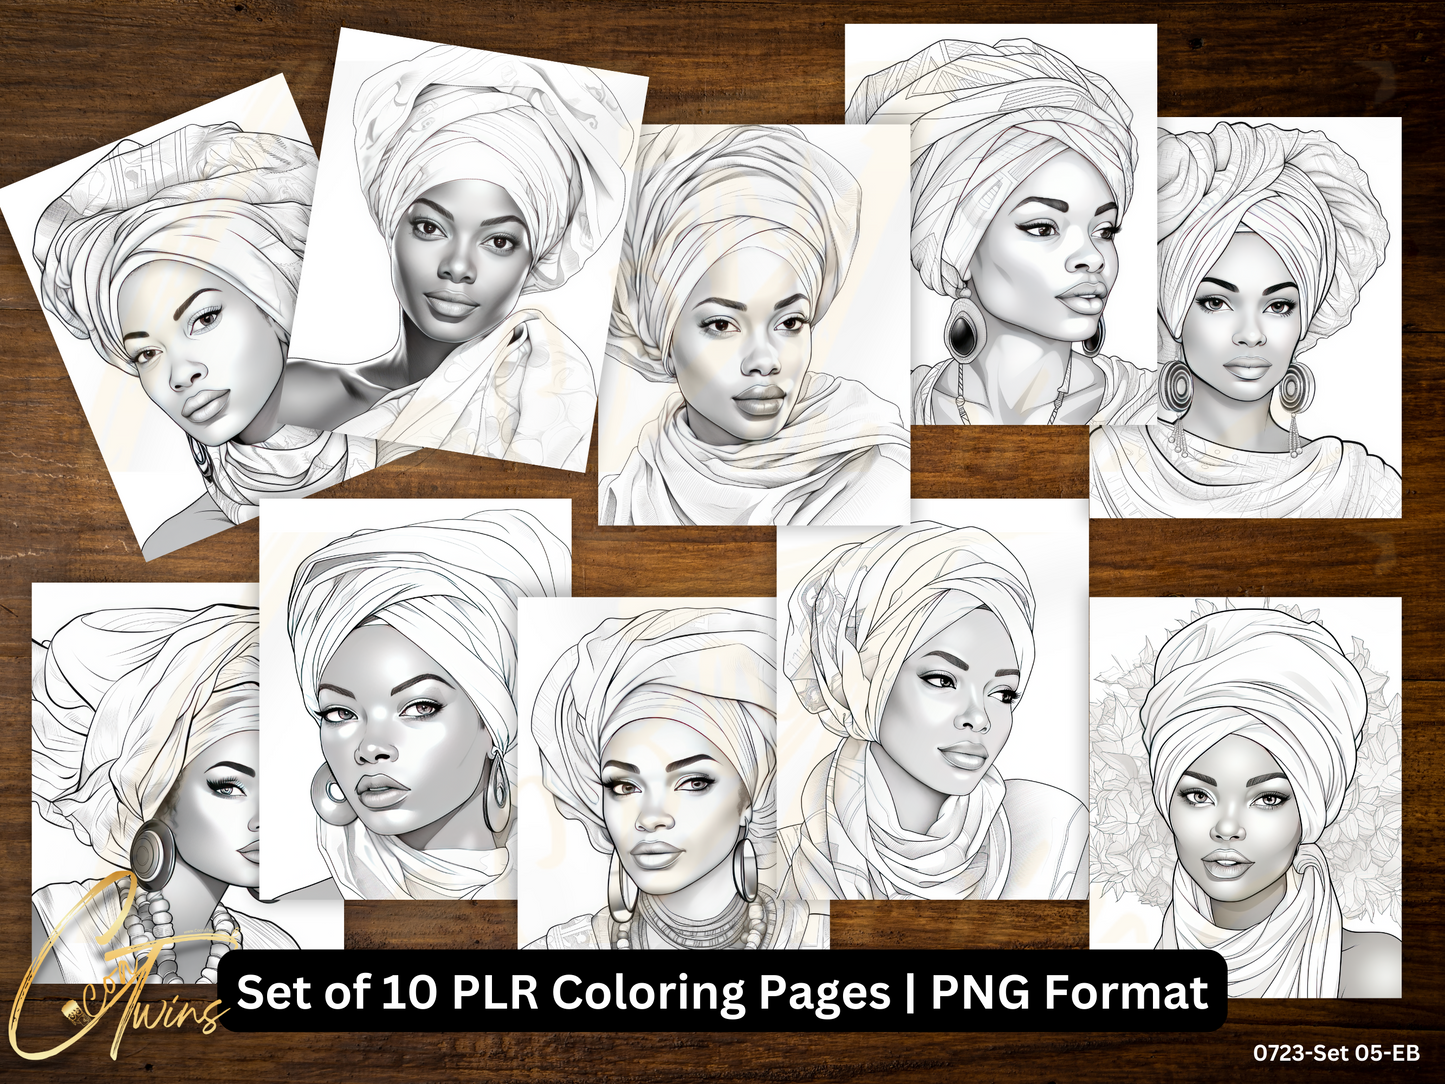 Limited Edition | PLR Coloring Pages | Set 05-EB (0723)